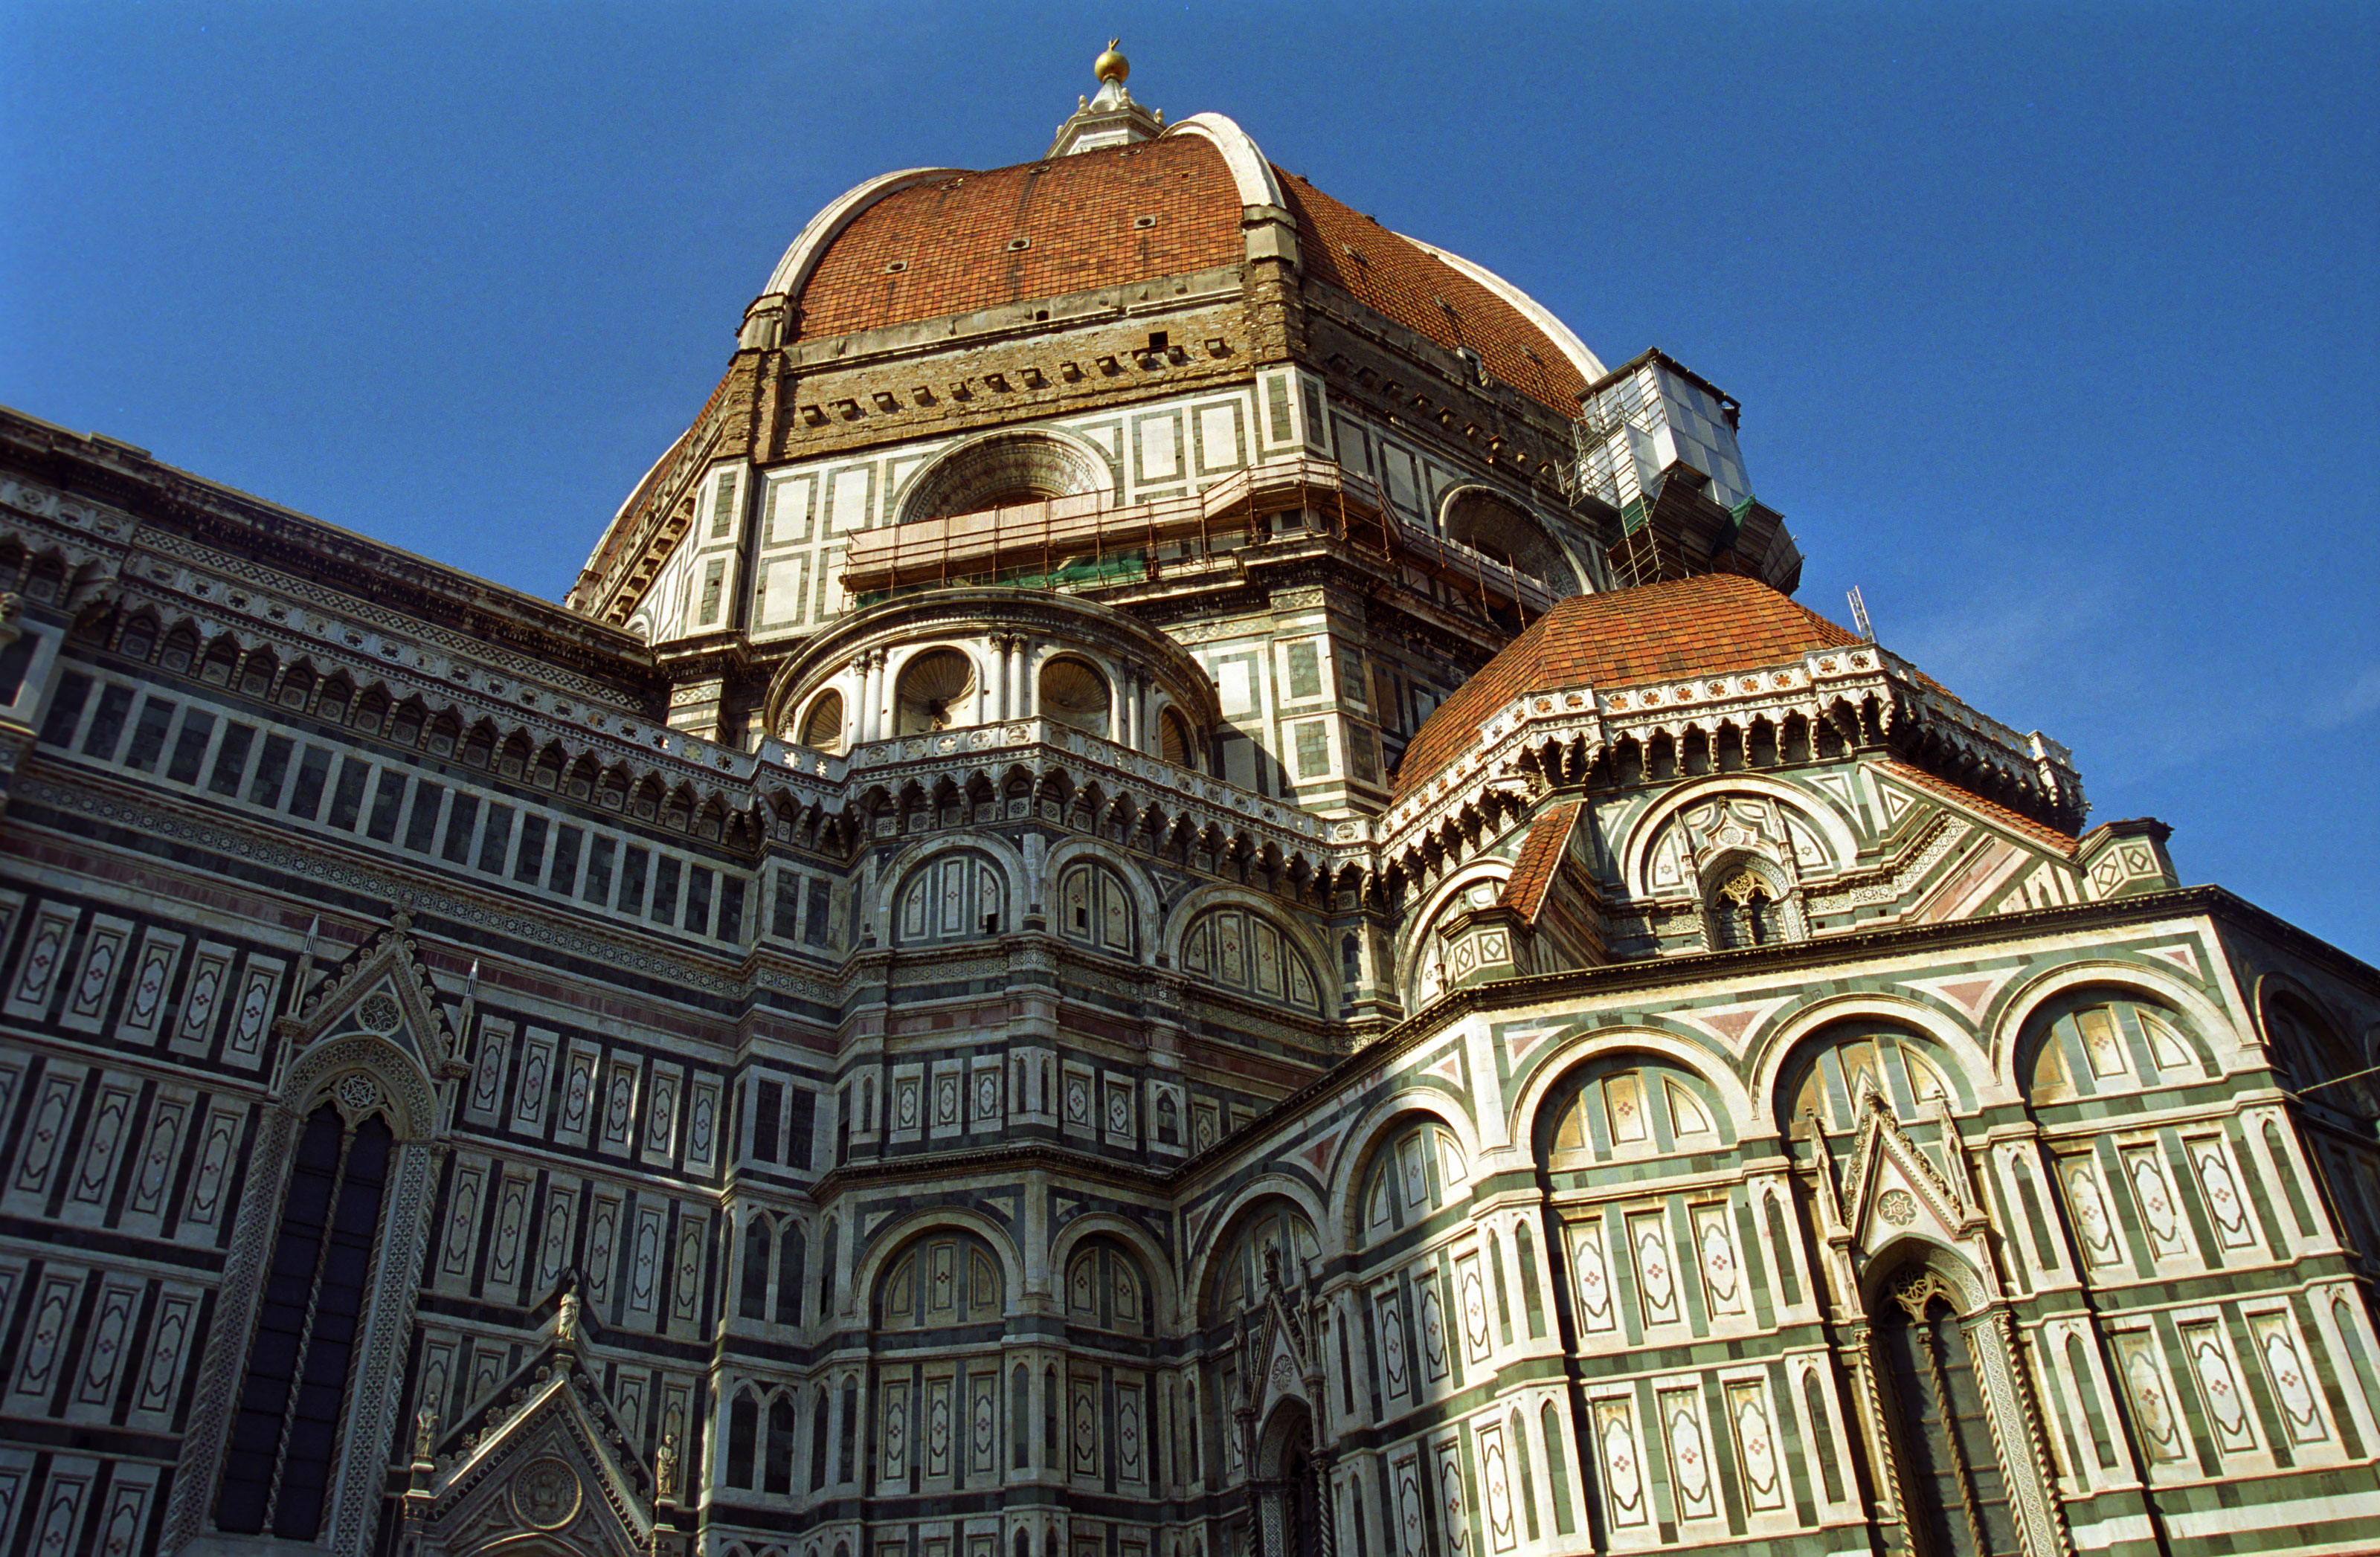 The Duomo, Florence : Travel Wallpaper and Stock Photo